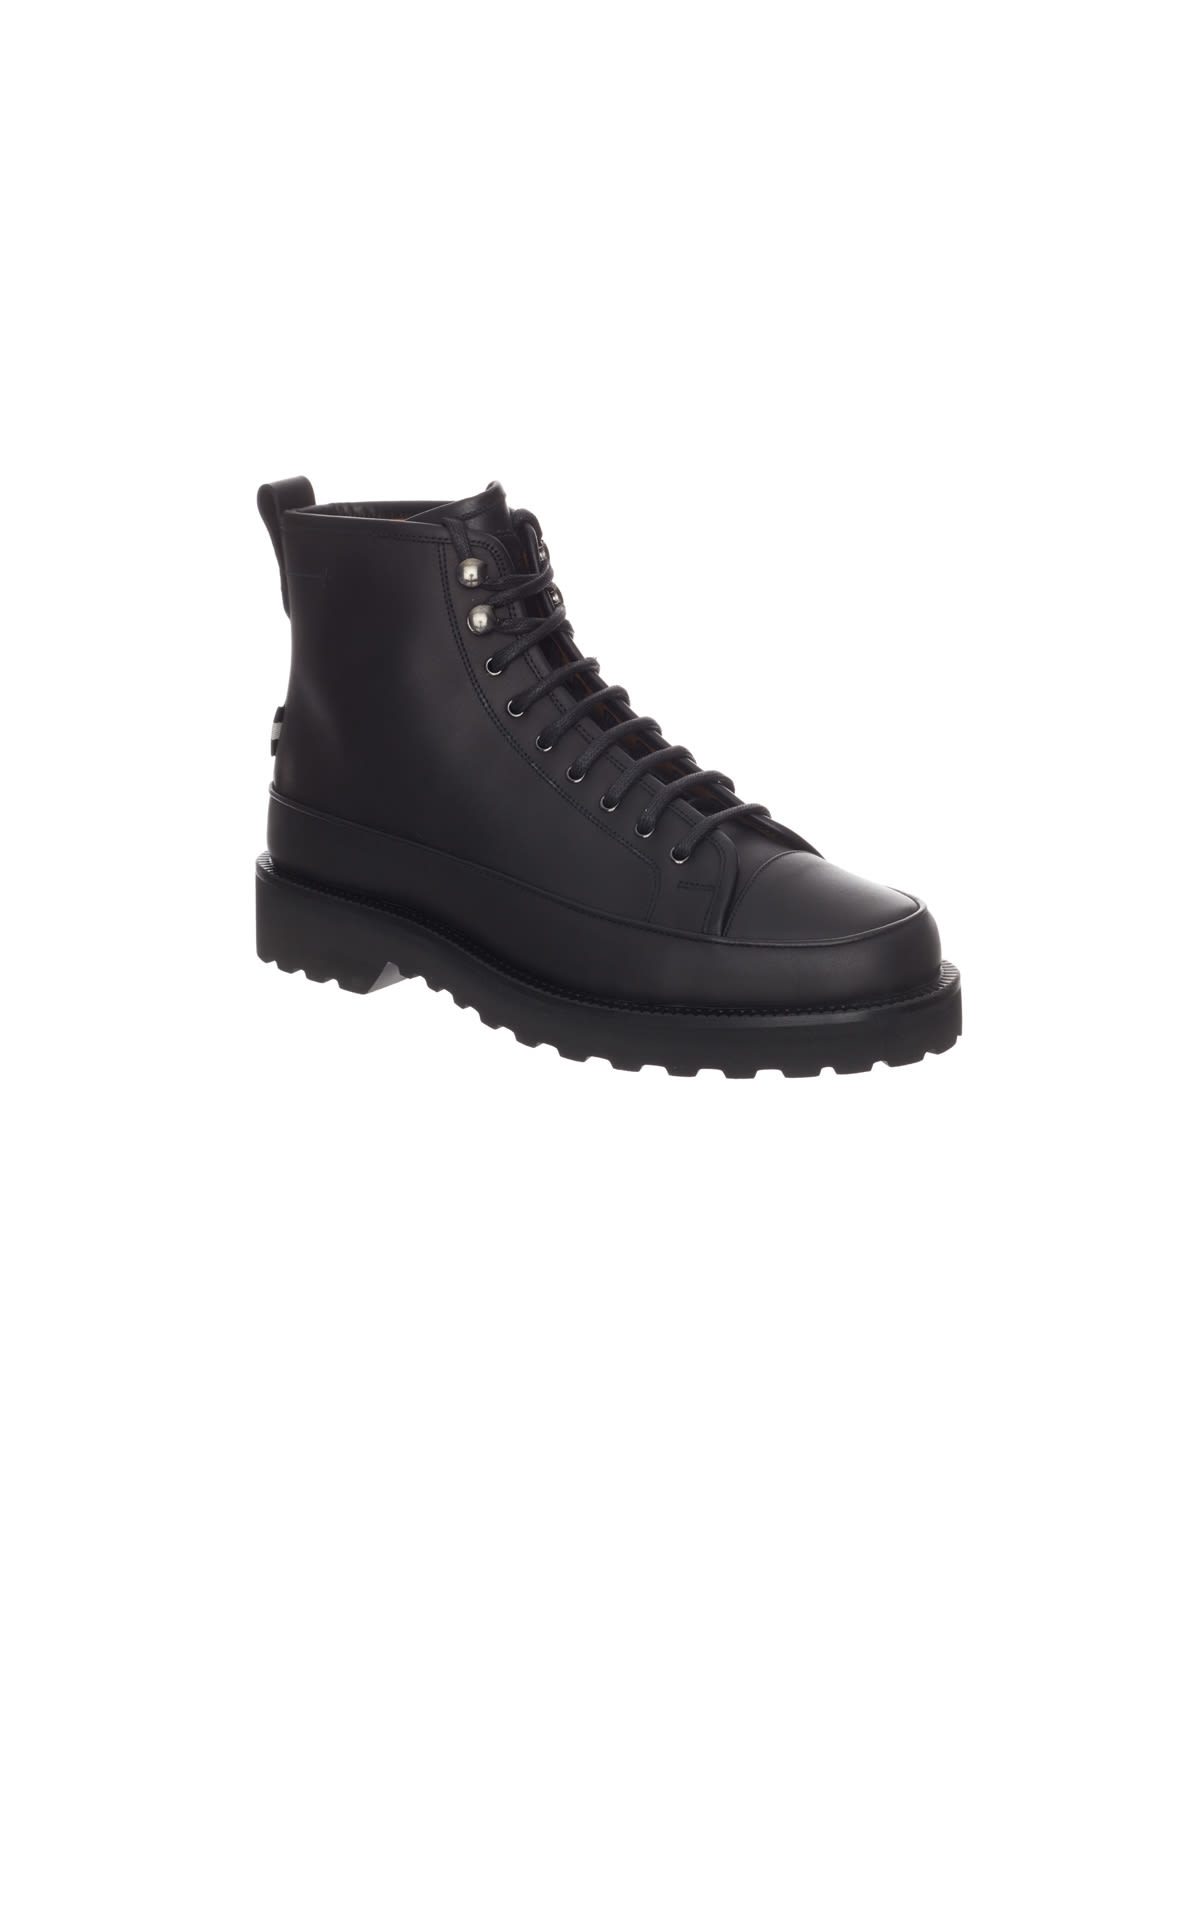 Bally Nortis boots from Bicester Village